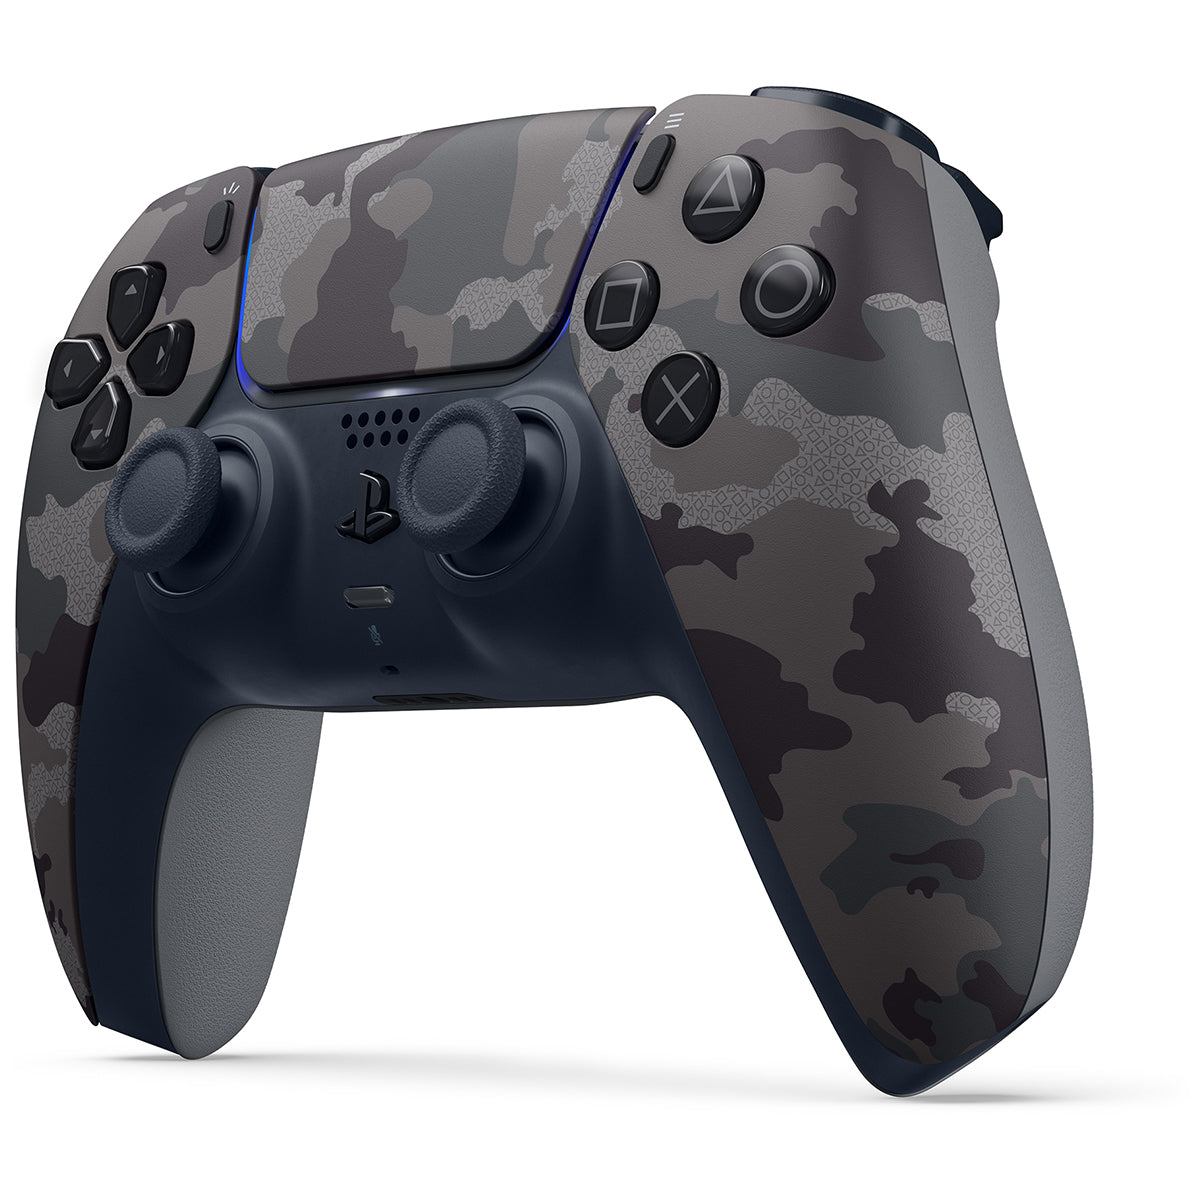 Sony Playstation 5 Digital Edition Bundle with Extra Gray Camo Controller, Black PULSE 3D Wireless Headset and Gamer Starter Pack - Pro-Distributing